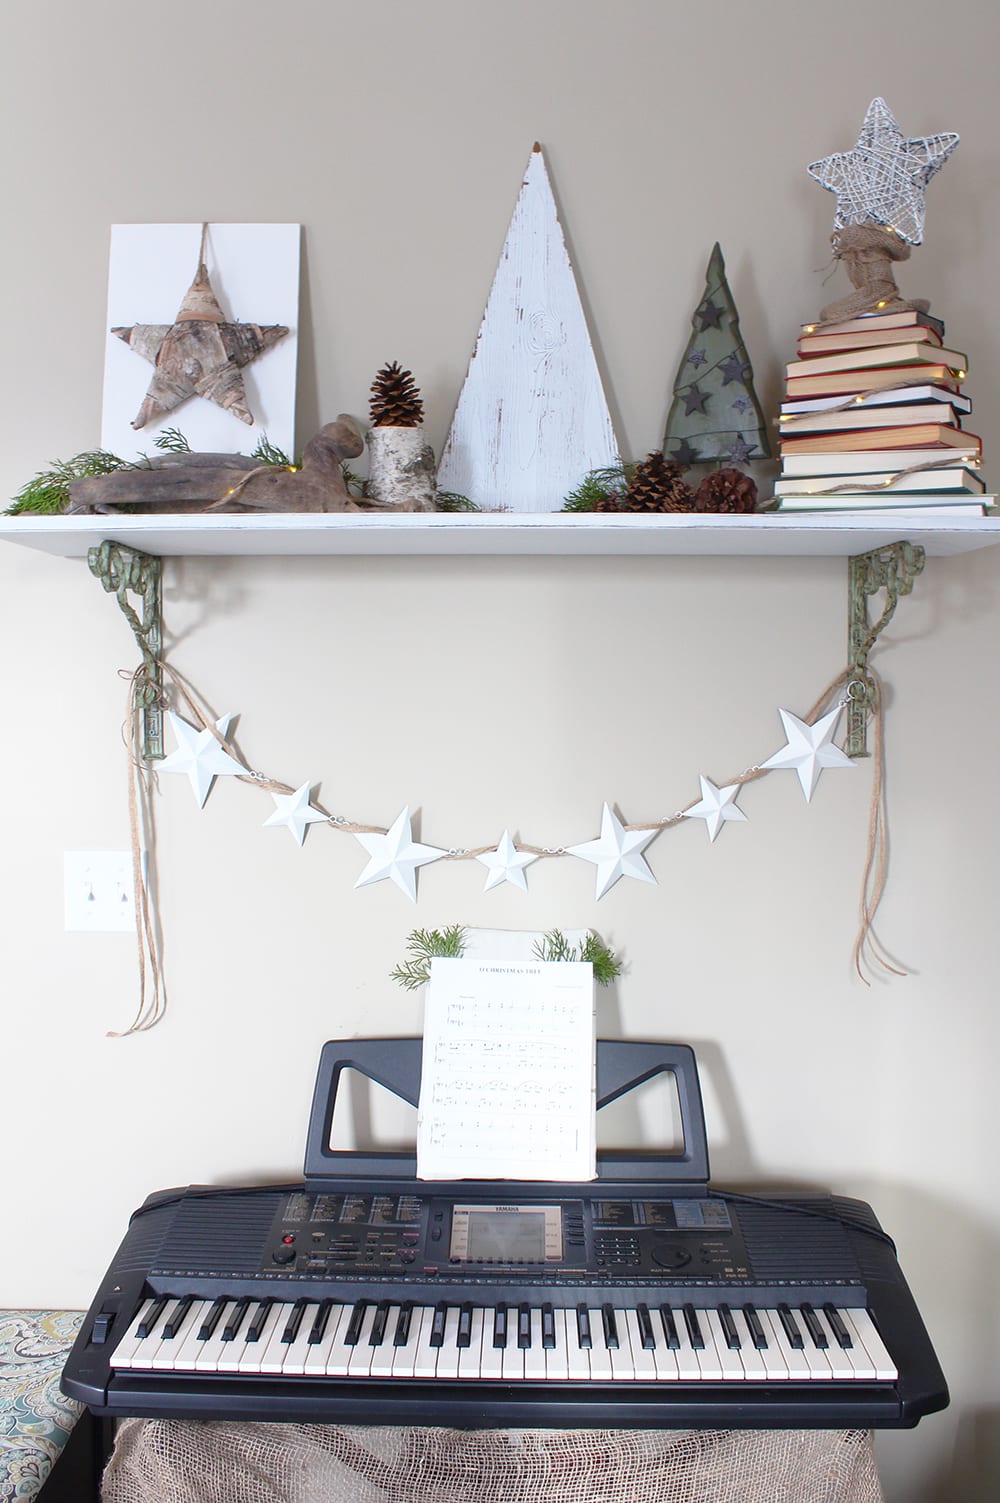 Nature inspired holiday decor featuring driftwood, a birch bark star and a Christmas tree made out of a stack of books.